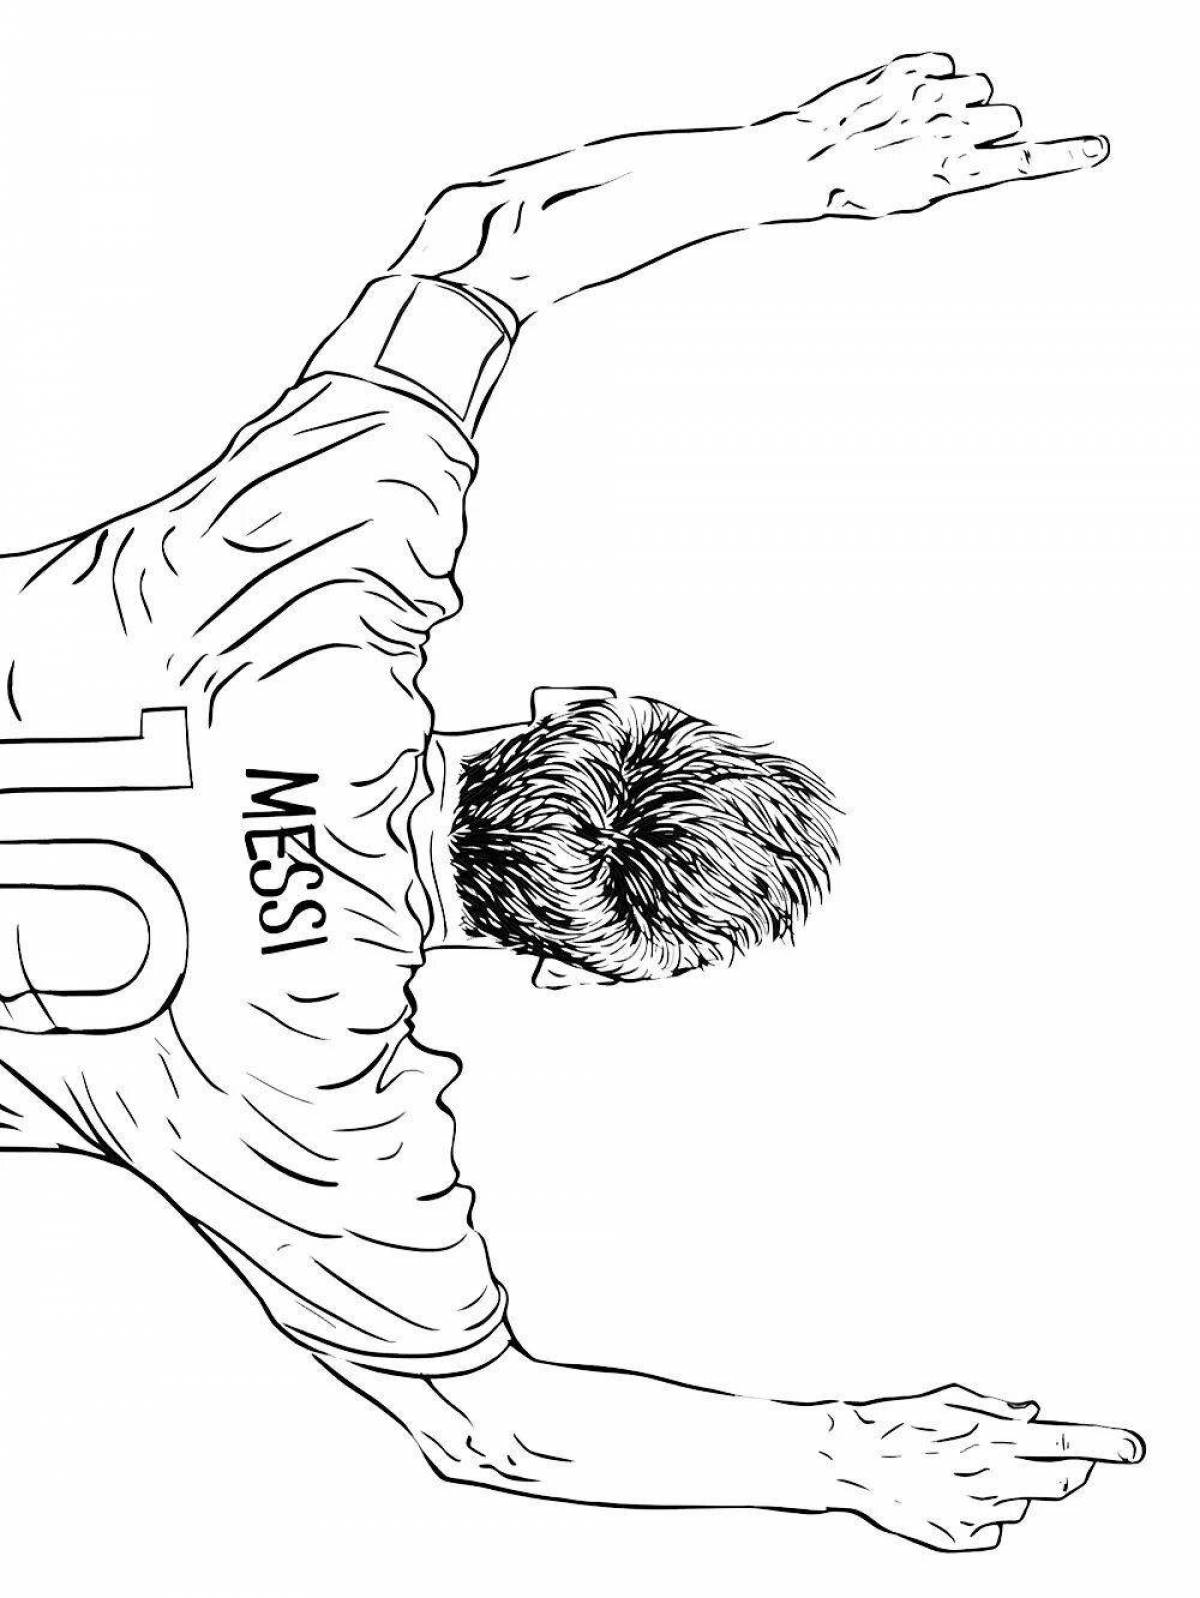 Great leo messi coloring book